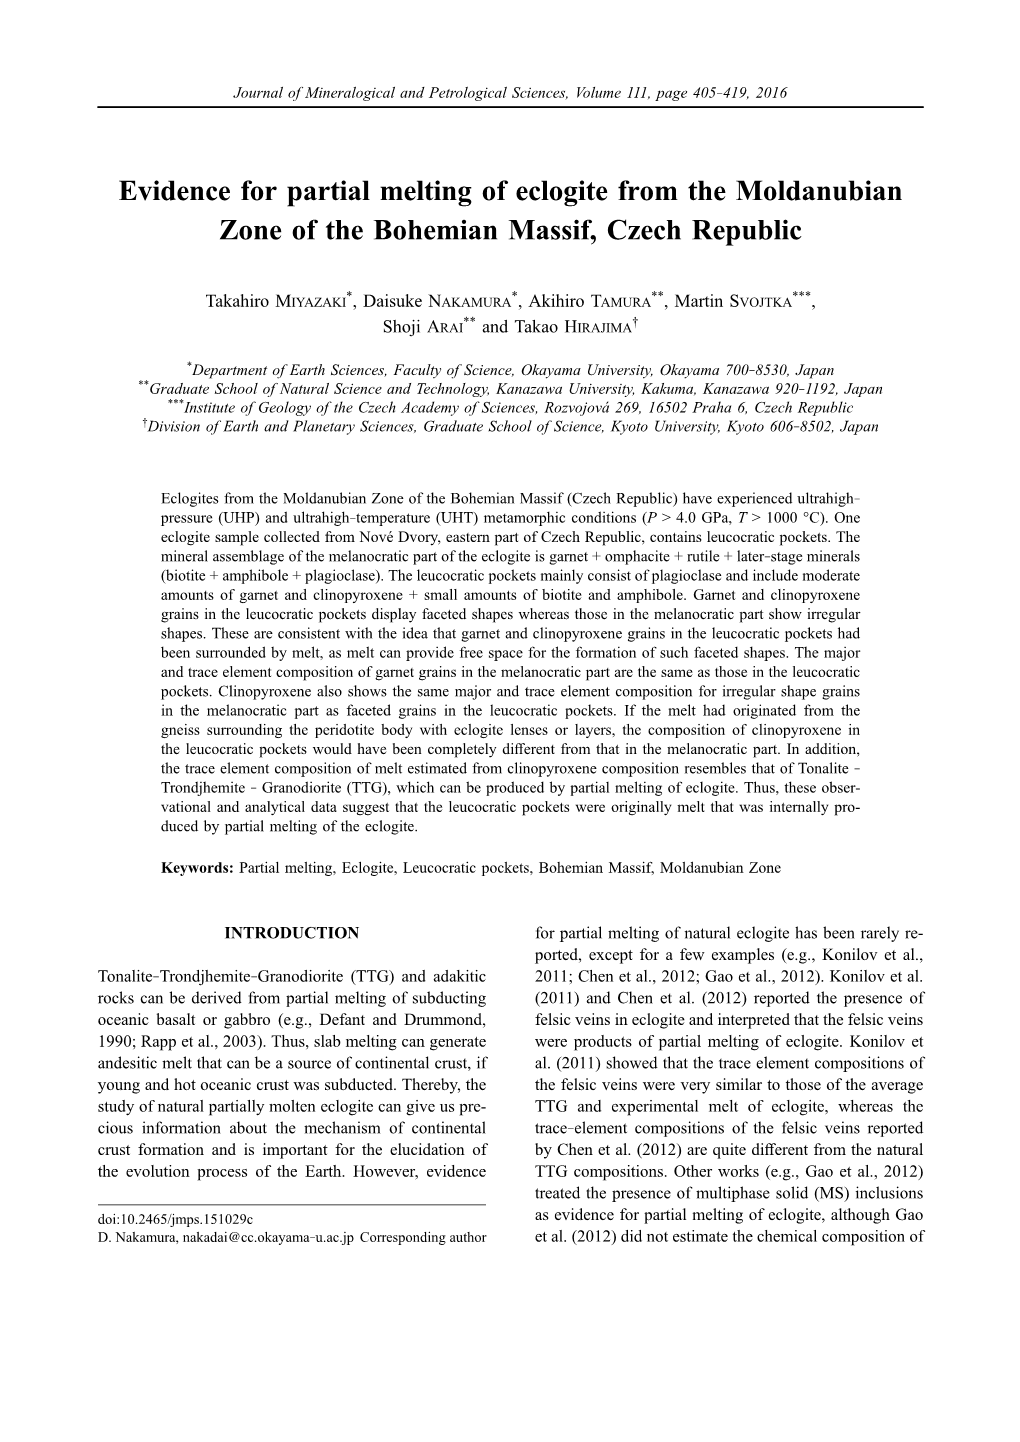 Evidence for Partial Melting of Eclogite from the Moldanubian Zone of the Bohemian Massif, Czech Republic